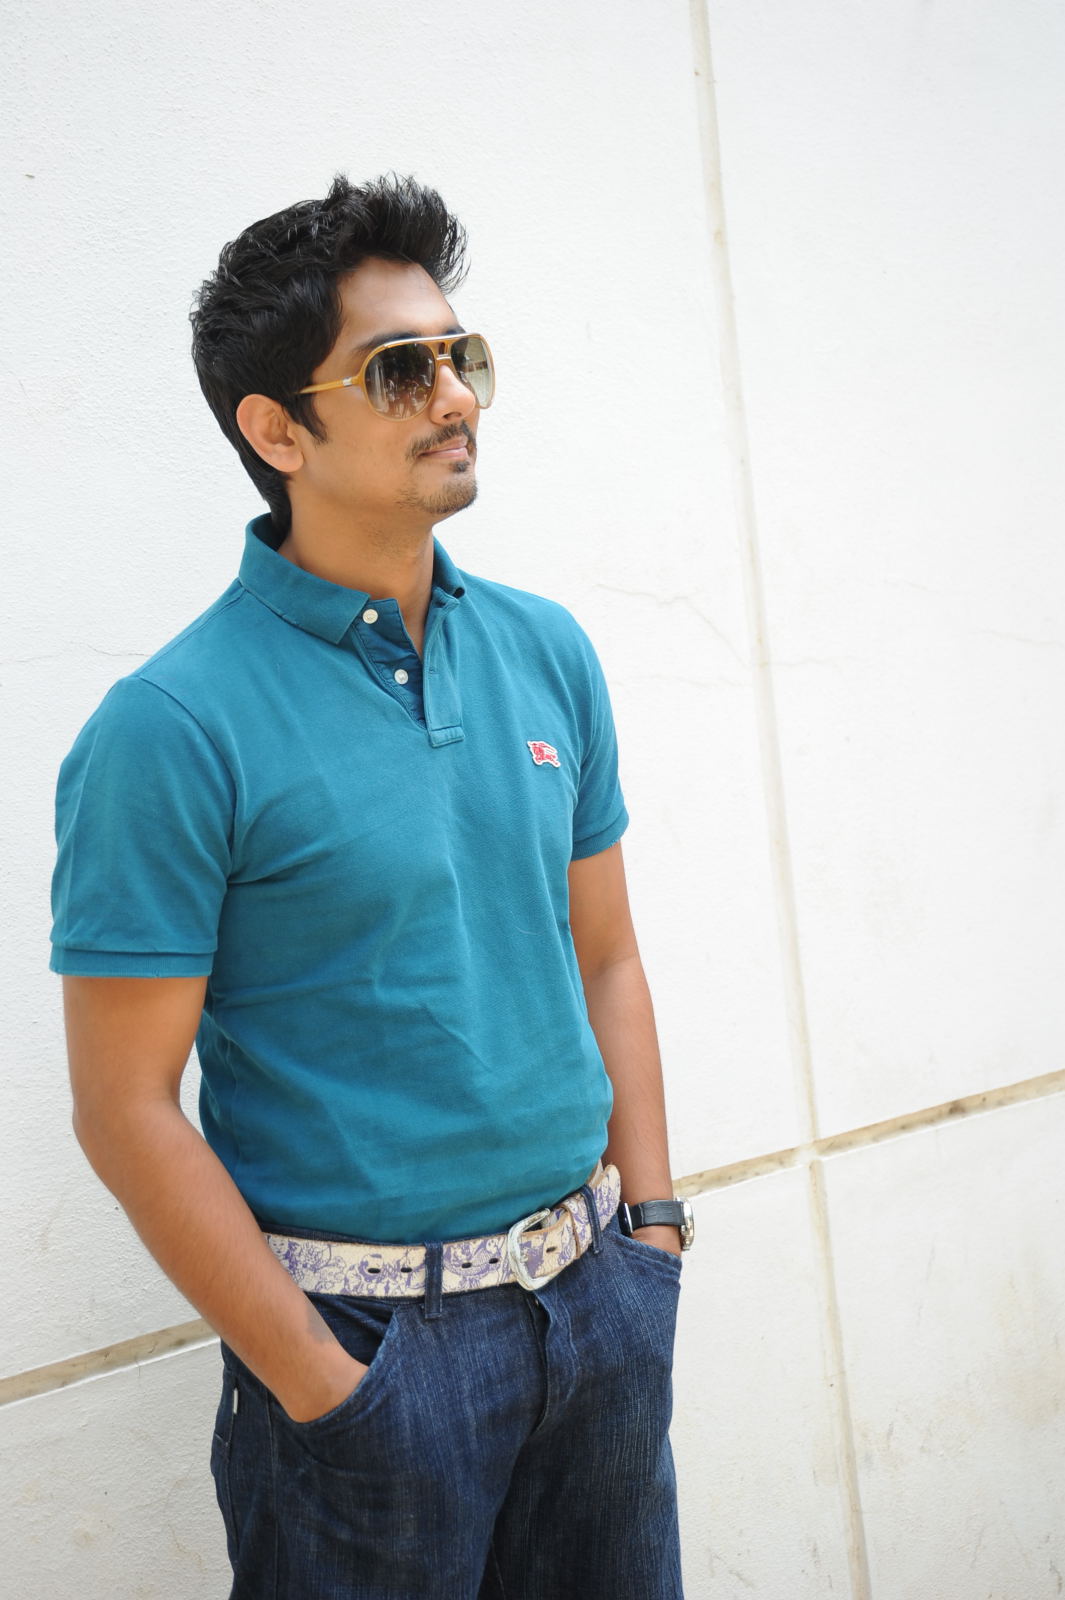 siddharth photos | Picture 41460